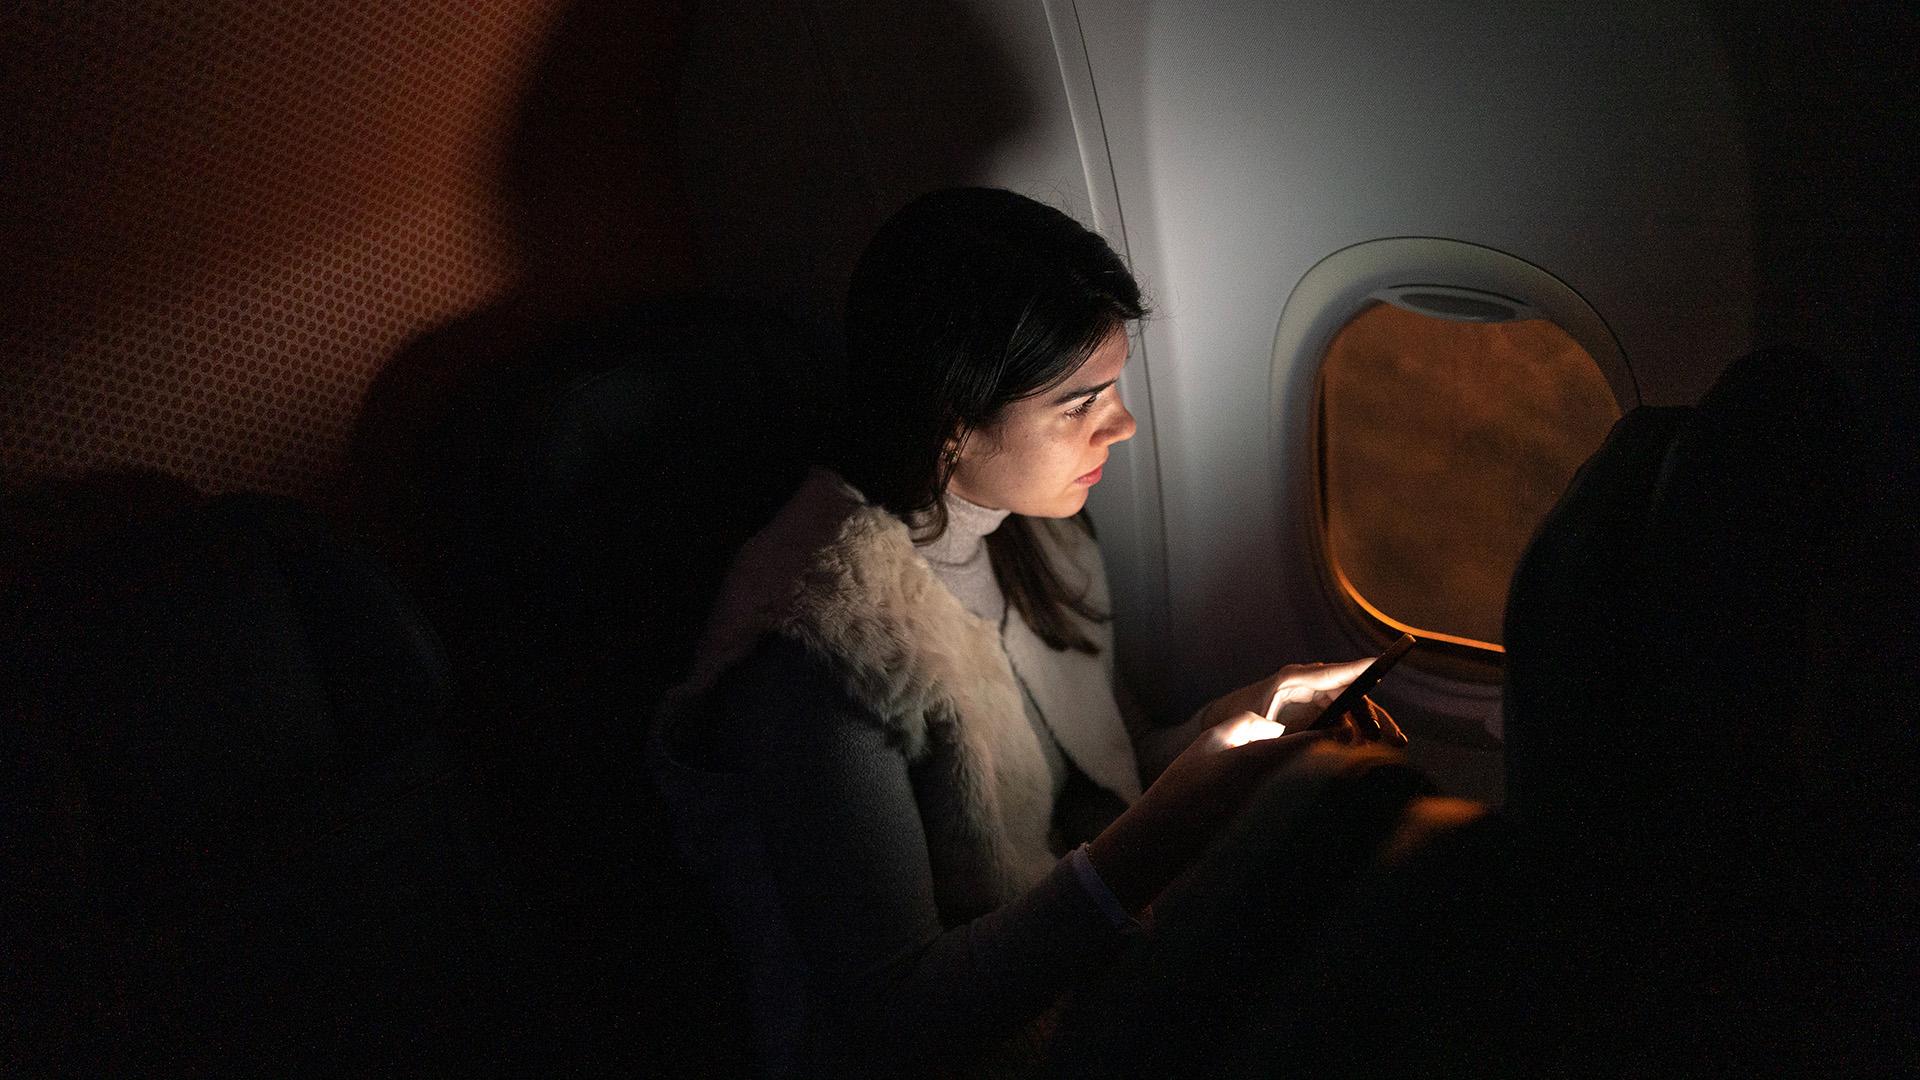 A passenger with long hair sits next to an airplane window in a dark cabin, looking out at a sunset, with the light from their phone illuminating their face.